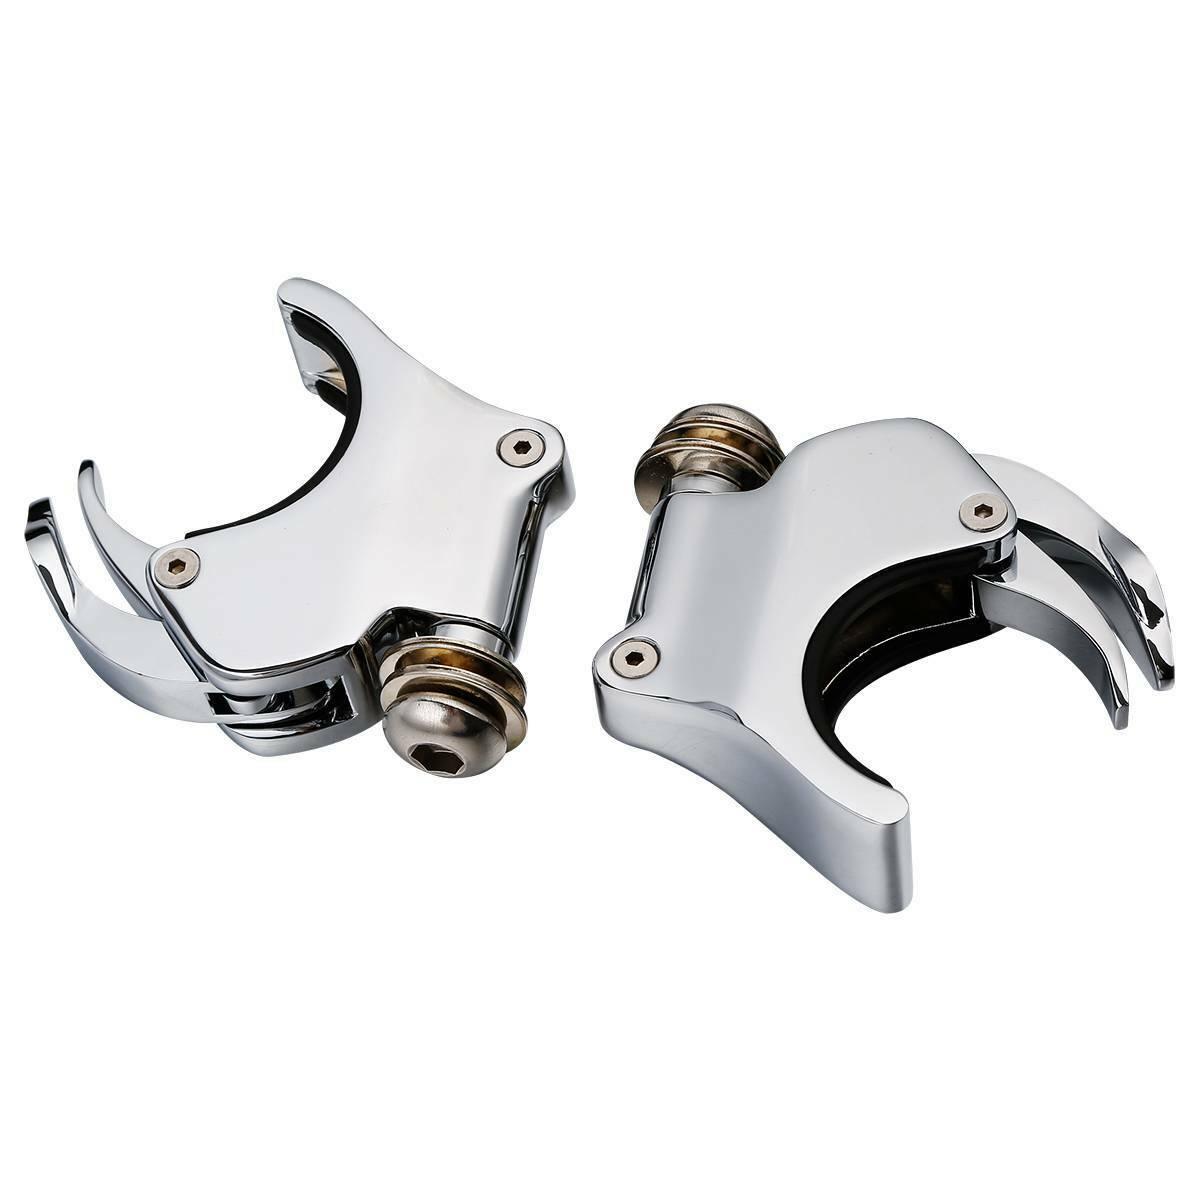 41mm Windshield Windscreen Clamp Fit For Harley Dyna FXDWG Softail Custom FXST - Moto Life Products